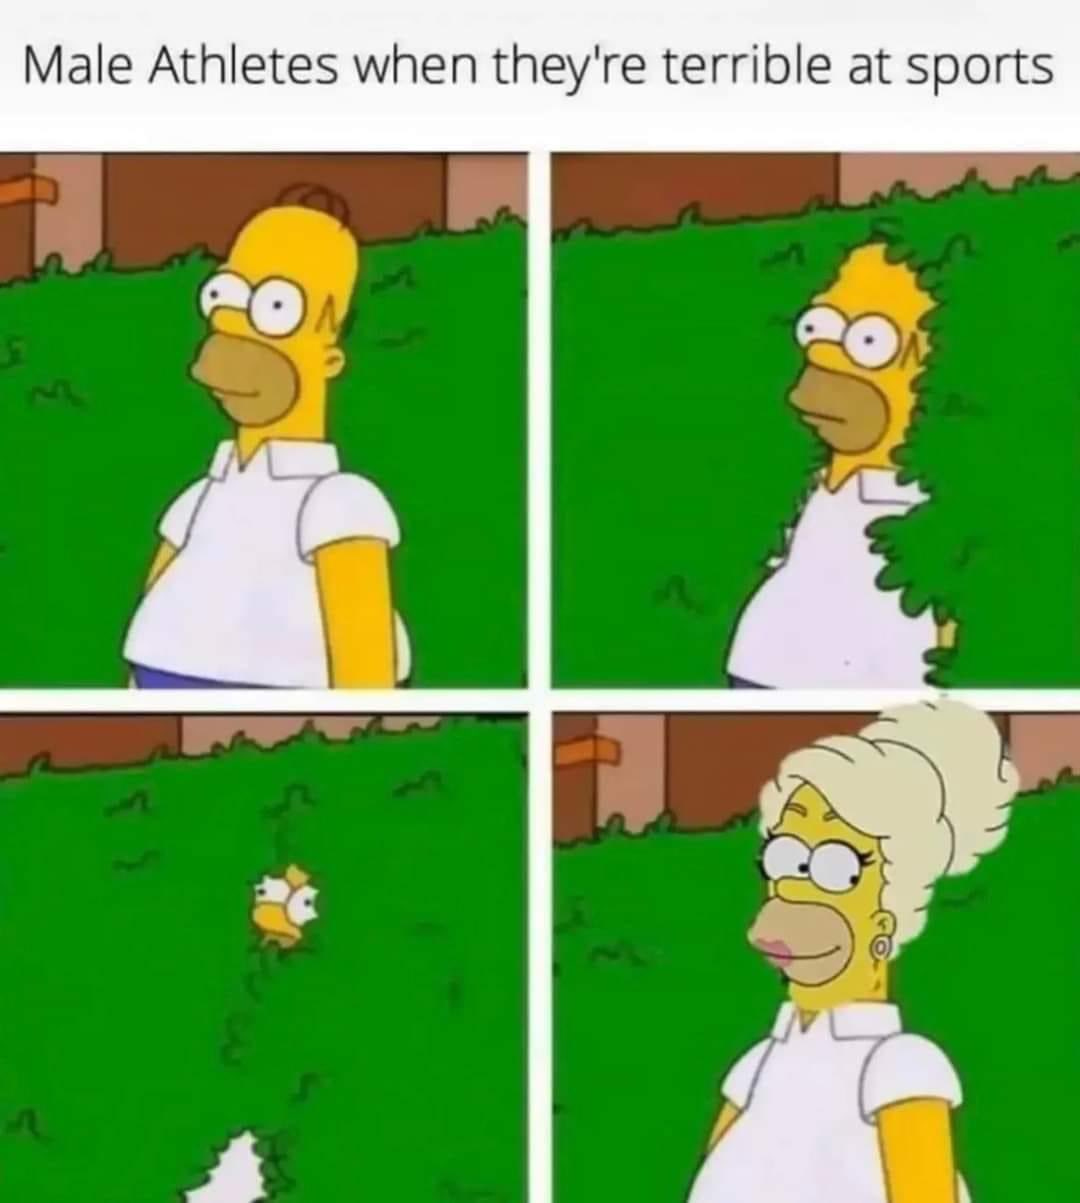 May be a cartoon of text that says 'Male Athletes when they're terrible at sports'